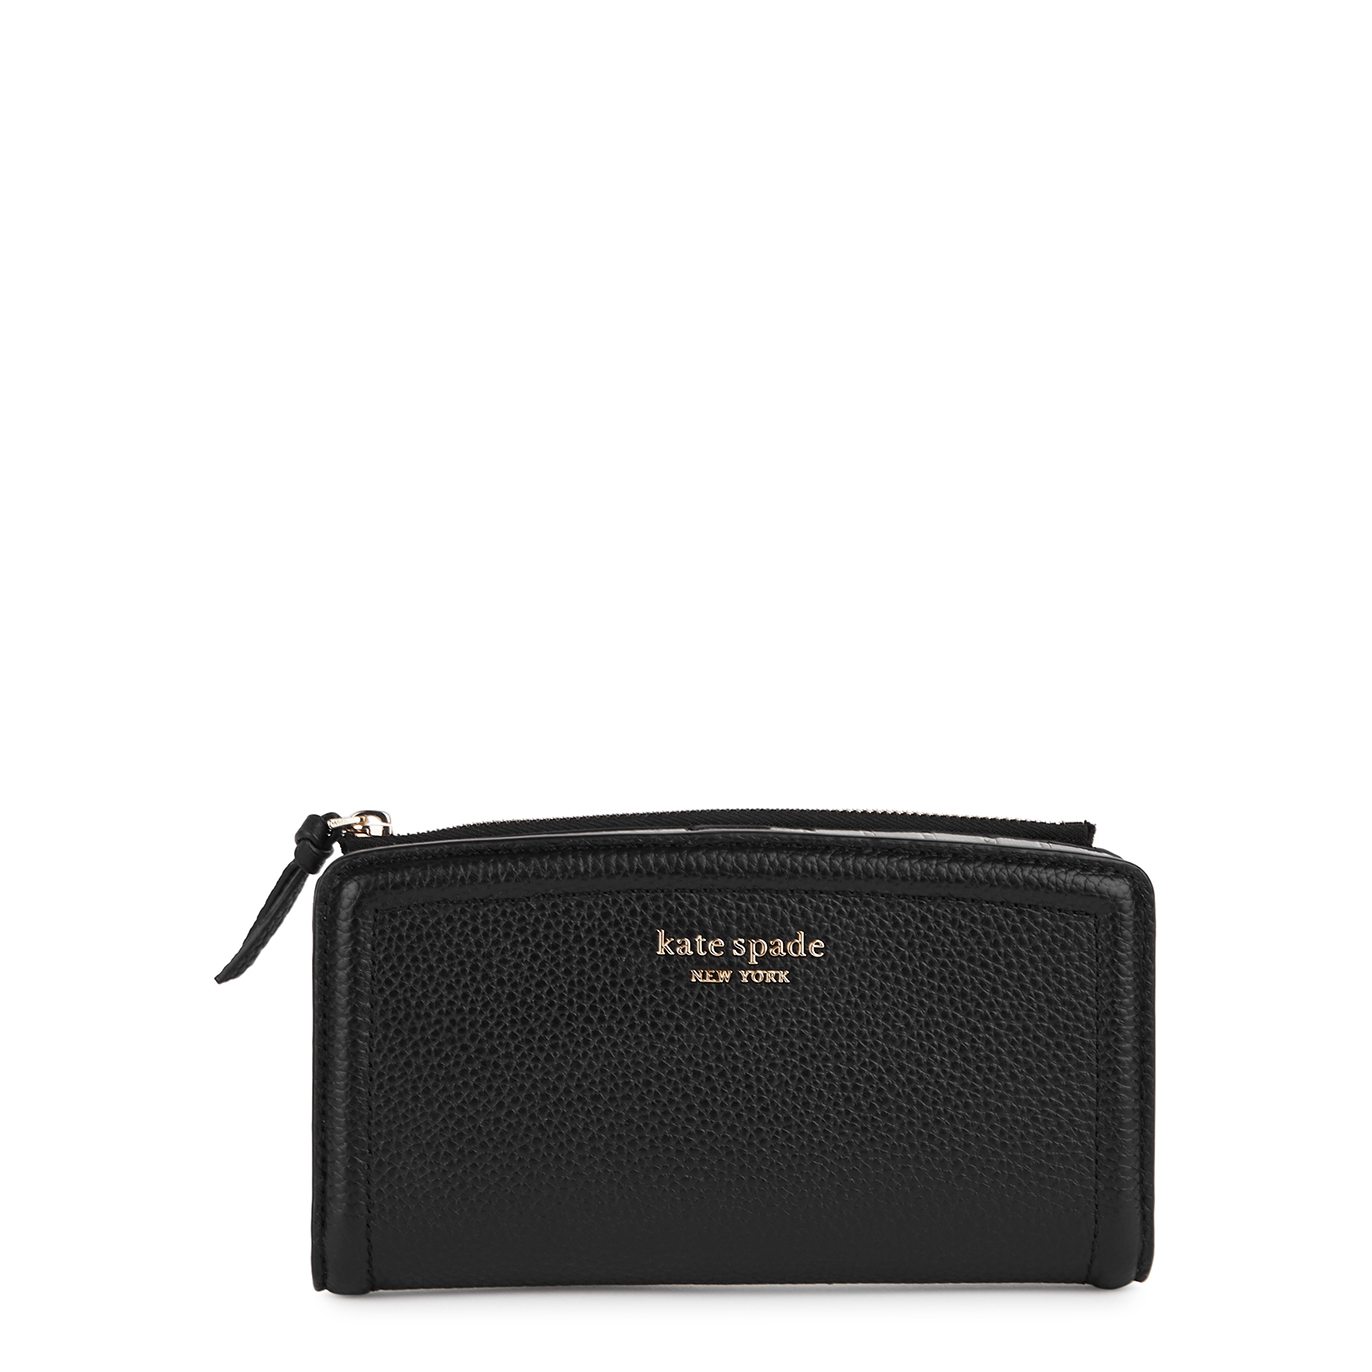 Kate Spade New York Knott Black Grained Leather Wallet - One Size